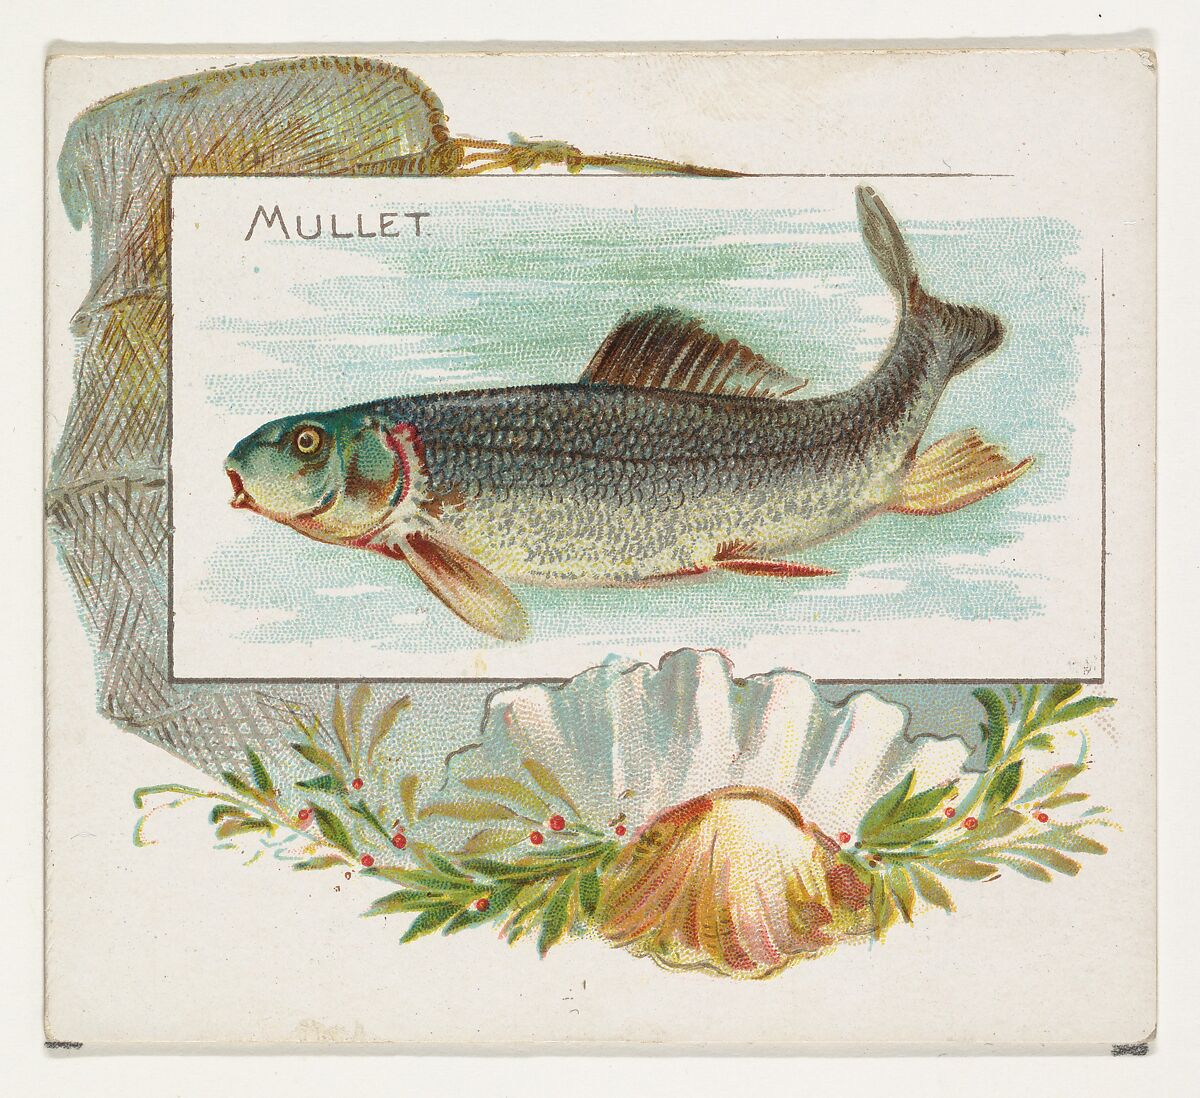 Mullet, from Fish from American Waters series (N39) for Allen & Ginter Cigarettes, Issued by Allen &amp; Ginter (American, Richmond, Virginia), Commercial color lithograph 